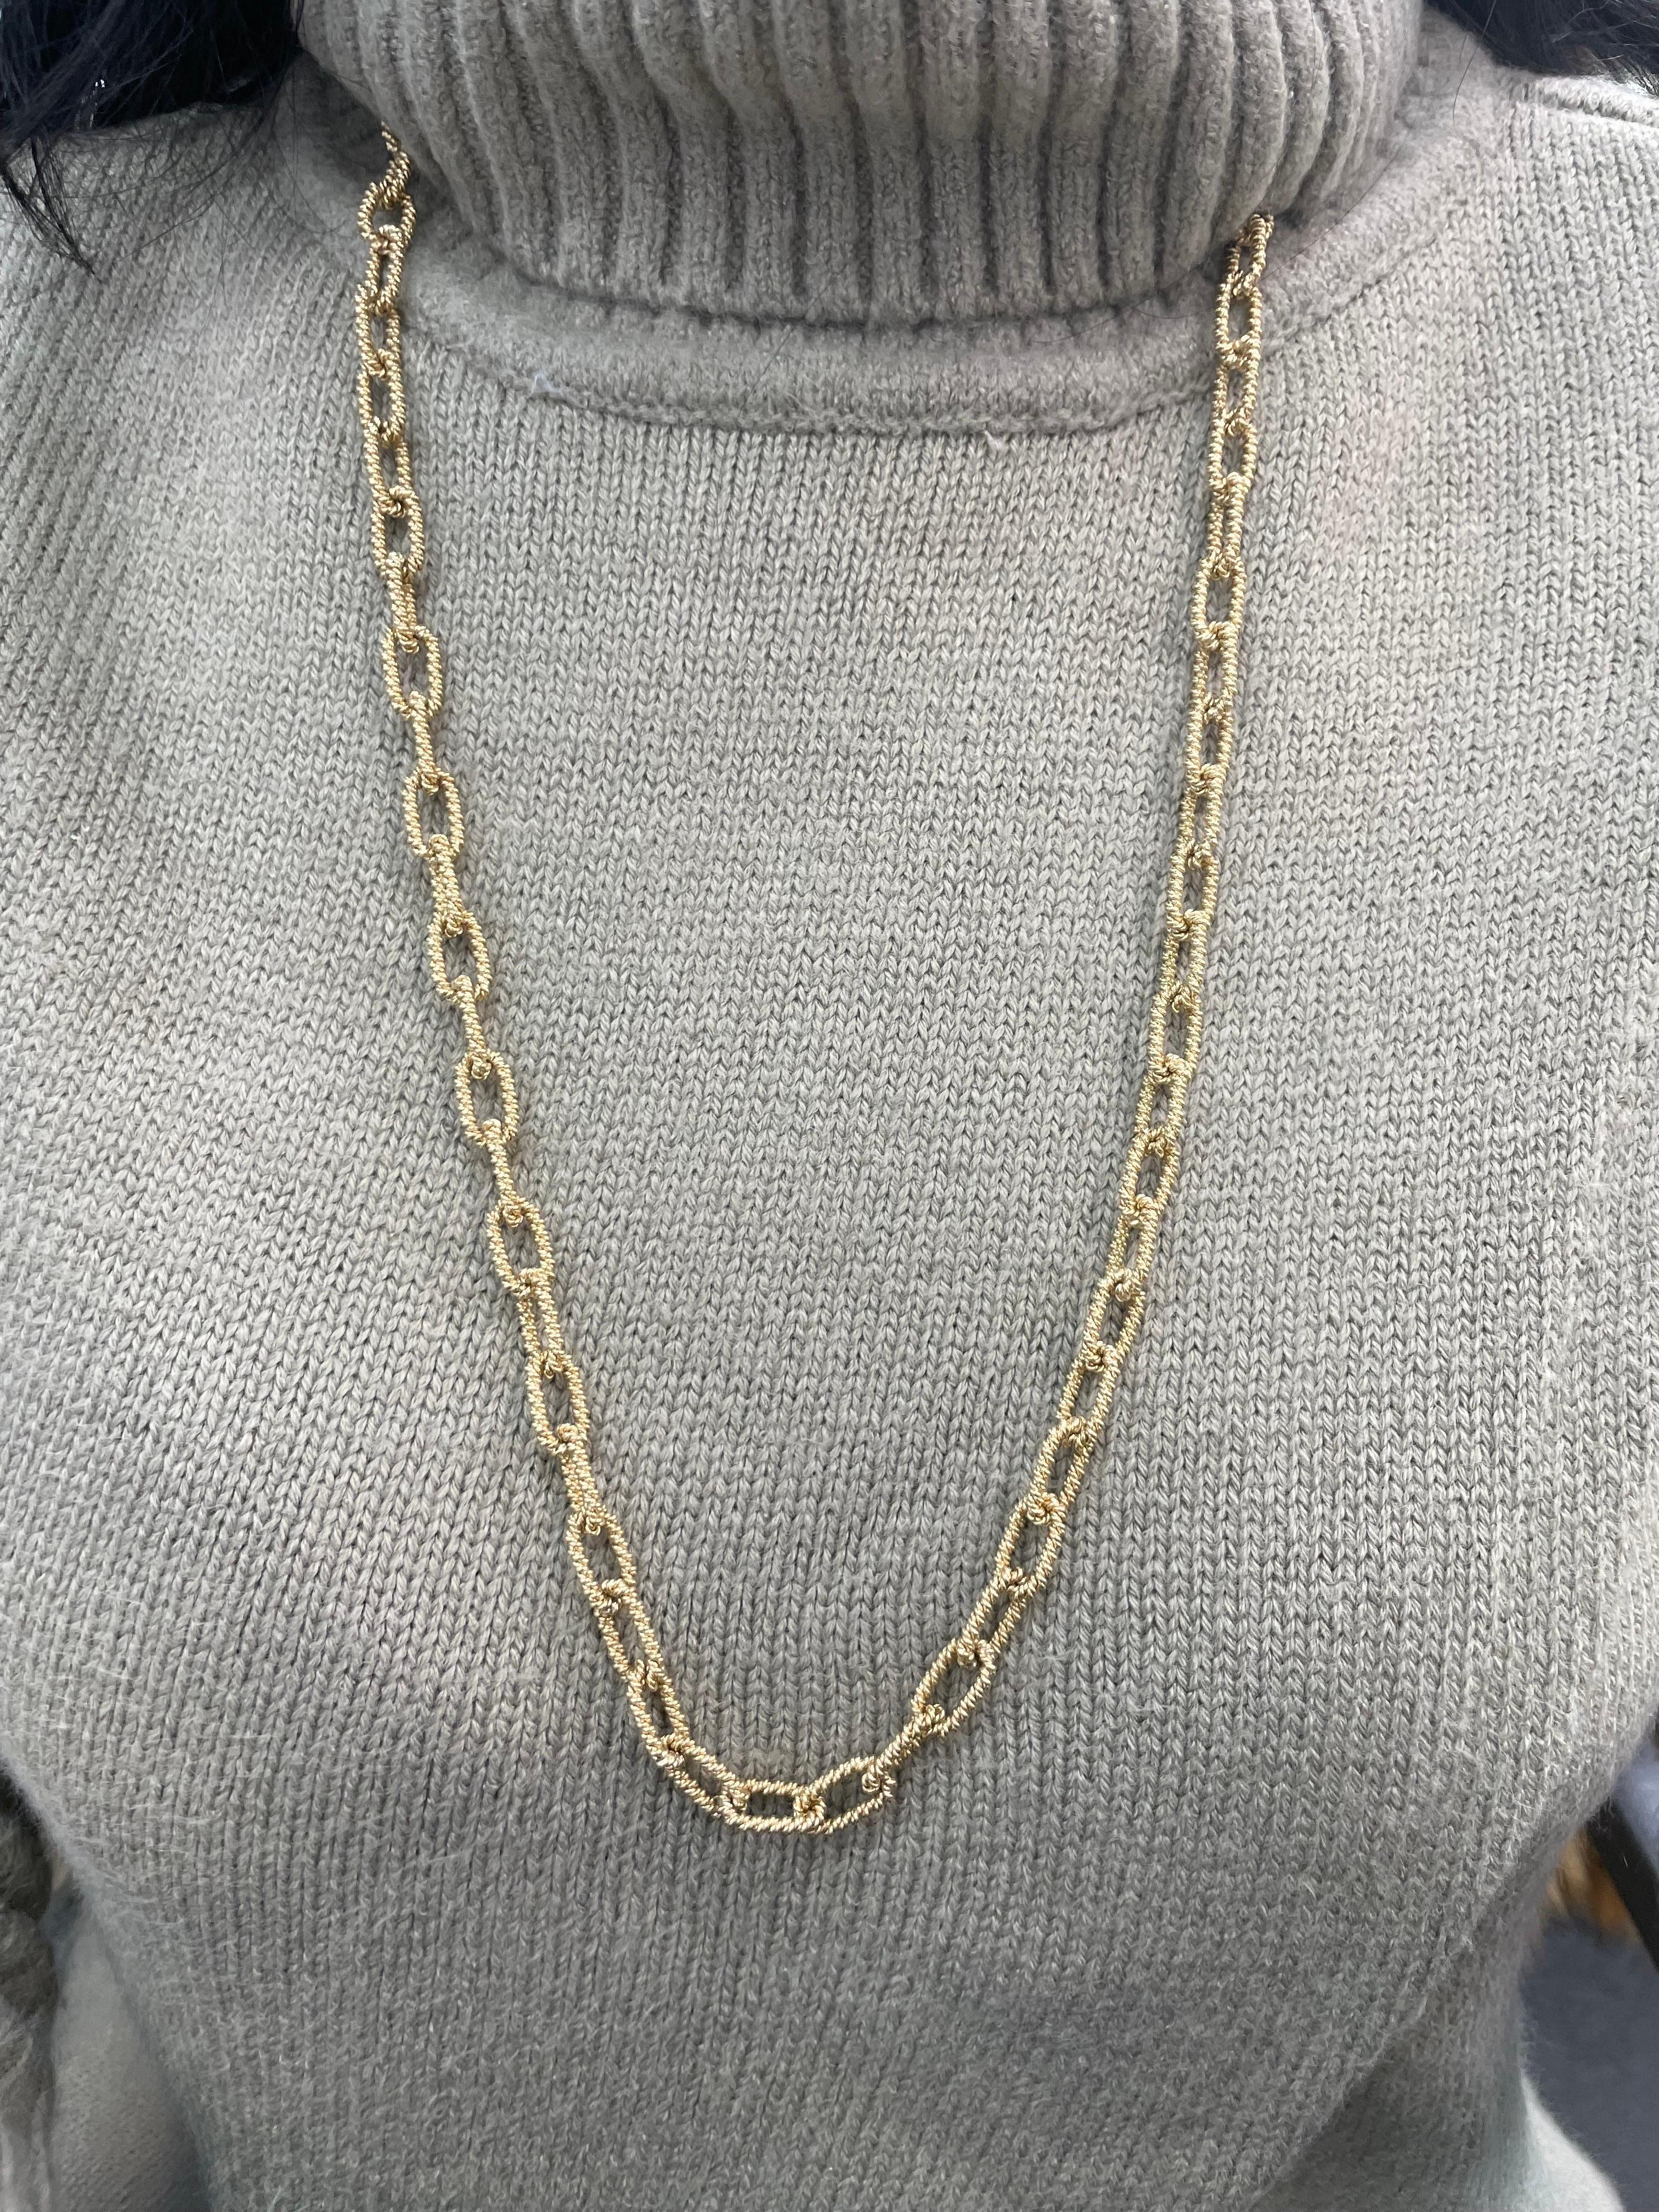 14 Karat Yellow Gold Heavy Rope Link Chain Necklace 84.5 Grams For Sale 4